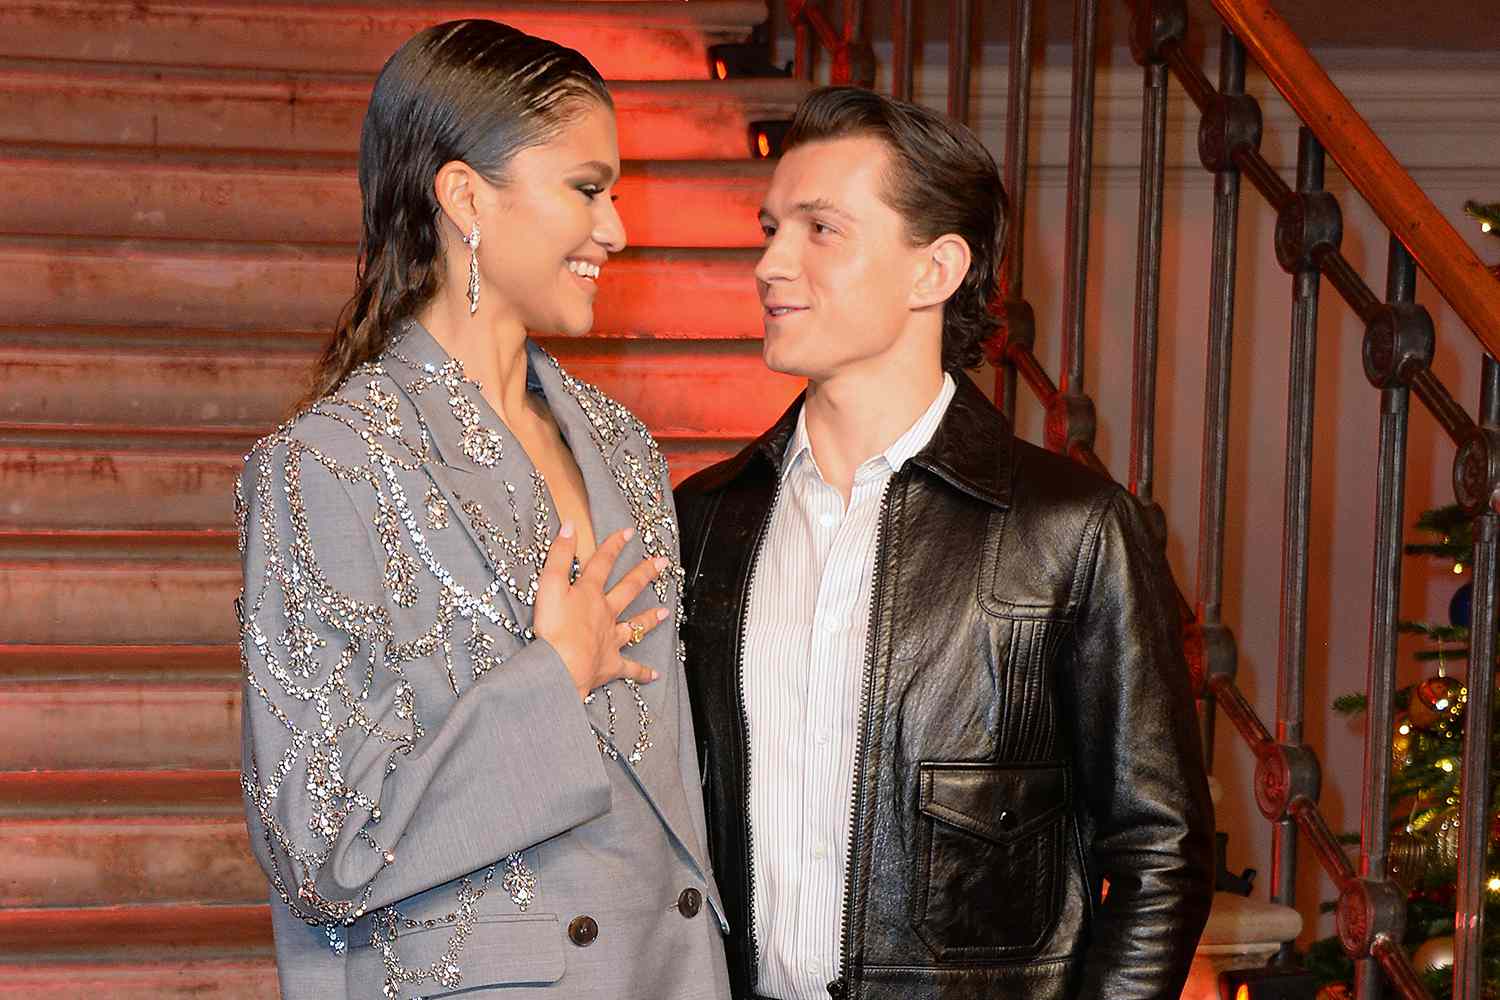 Zendaya and Tom Holland pose at a photocall for "Spider-Man: No Way Home" at The Old Sessions House on December 5, 2021 in London, England. 